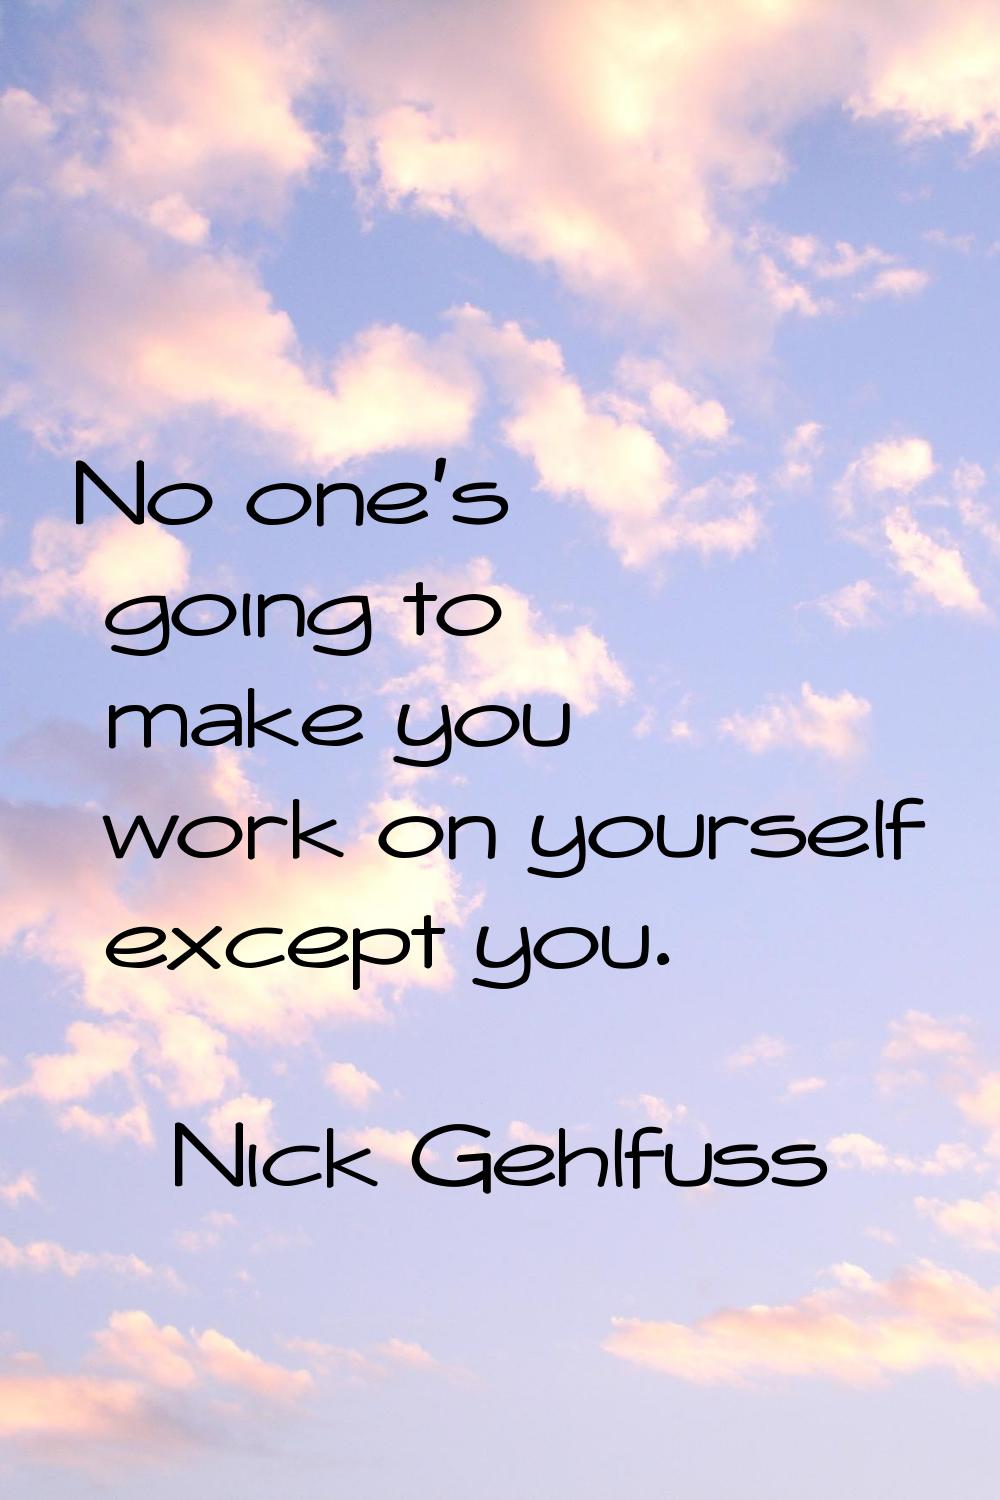 No one's going to make you work on yourself except you.